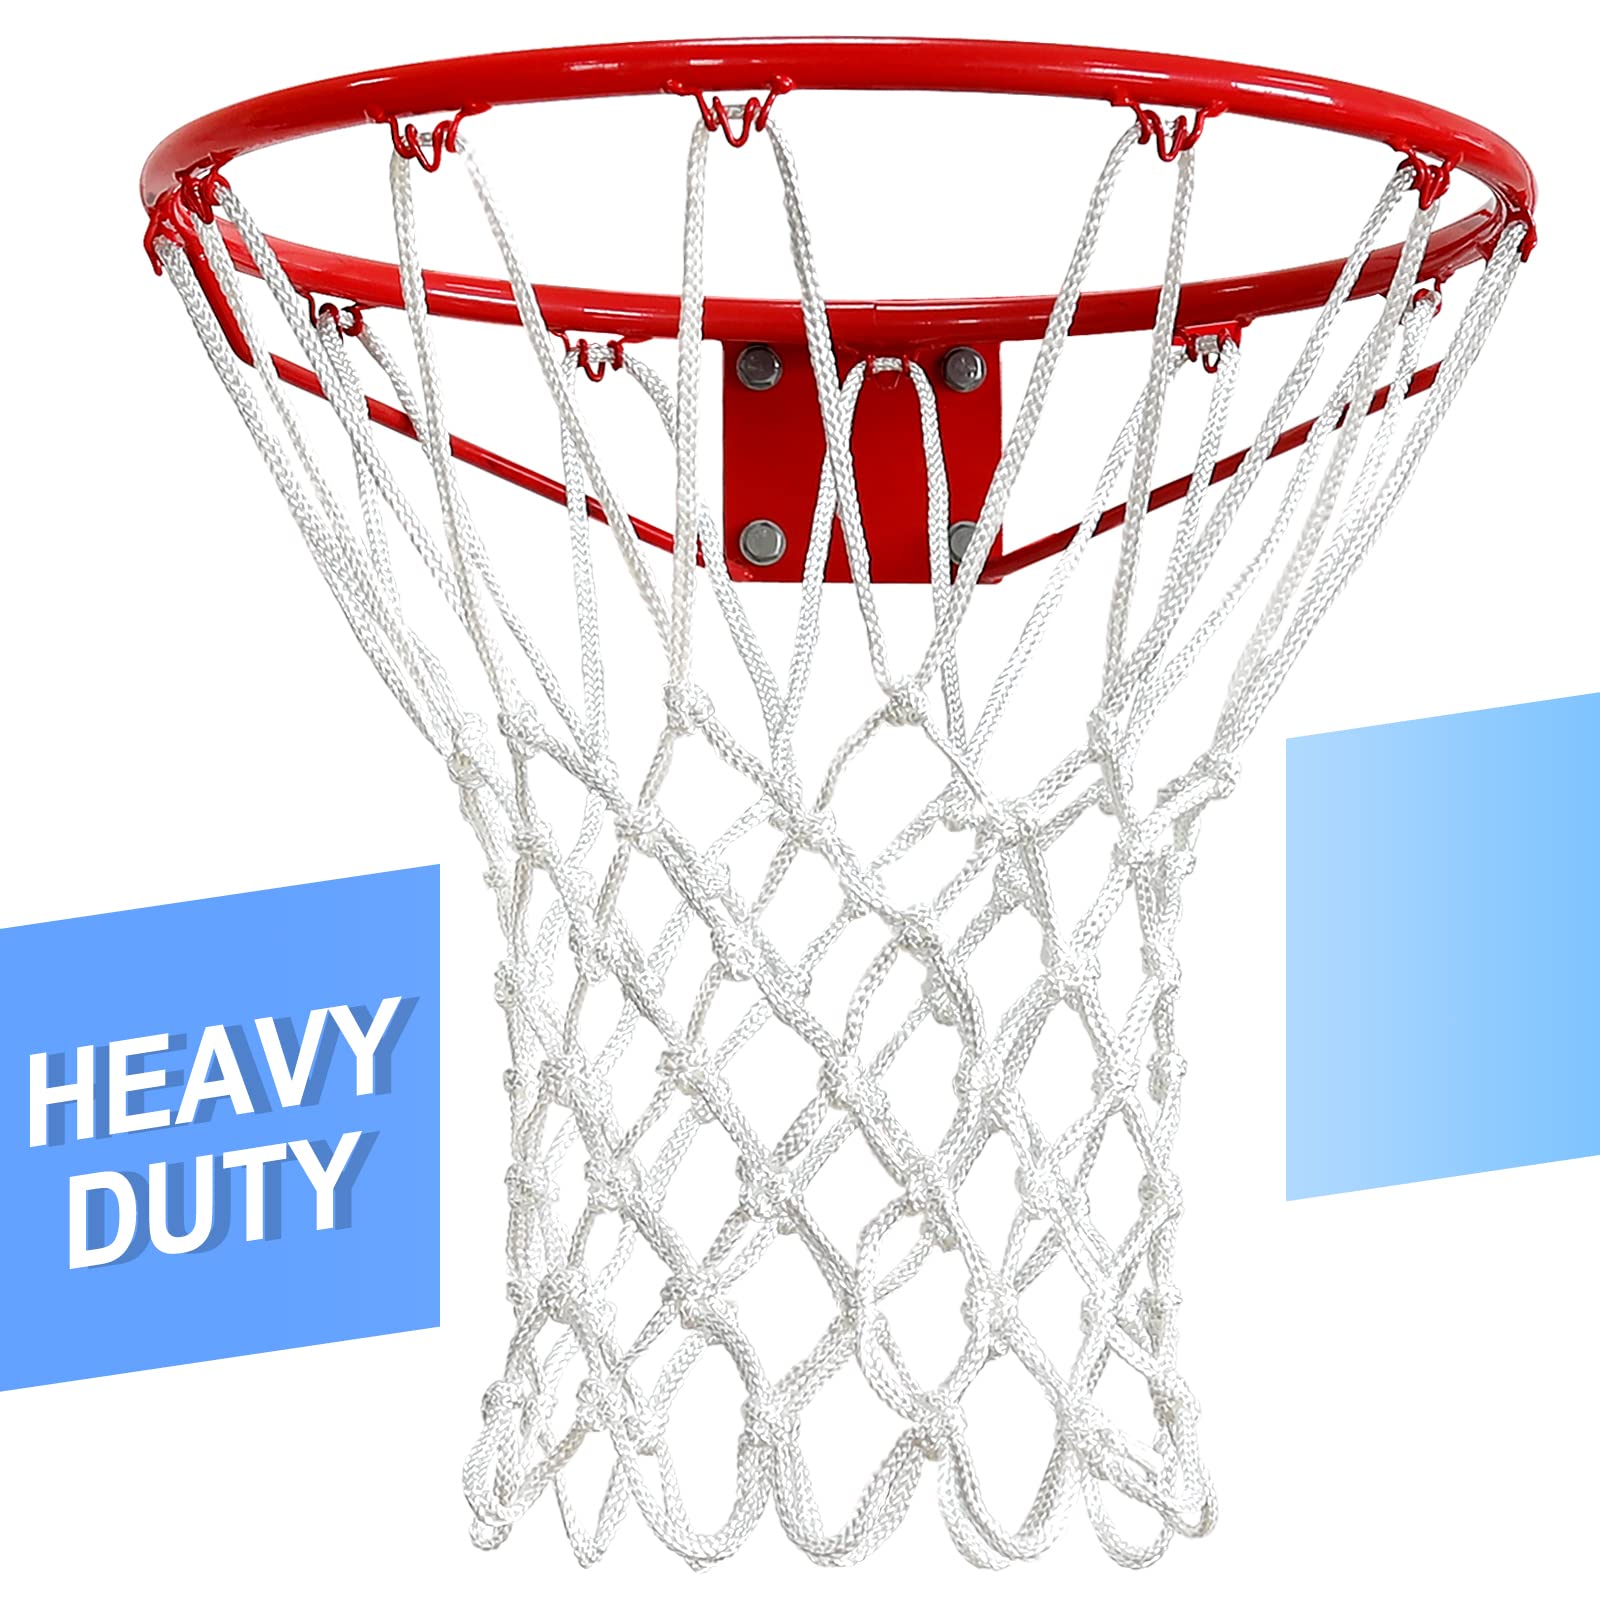 LAO XUE Basketball Net Outdoor,(716 oz) Professional Heavy Duty Basketball Net Replacement,All Weather Anti Whip, Suitable for O